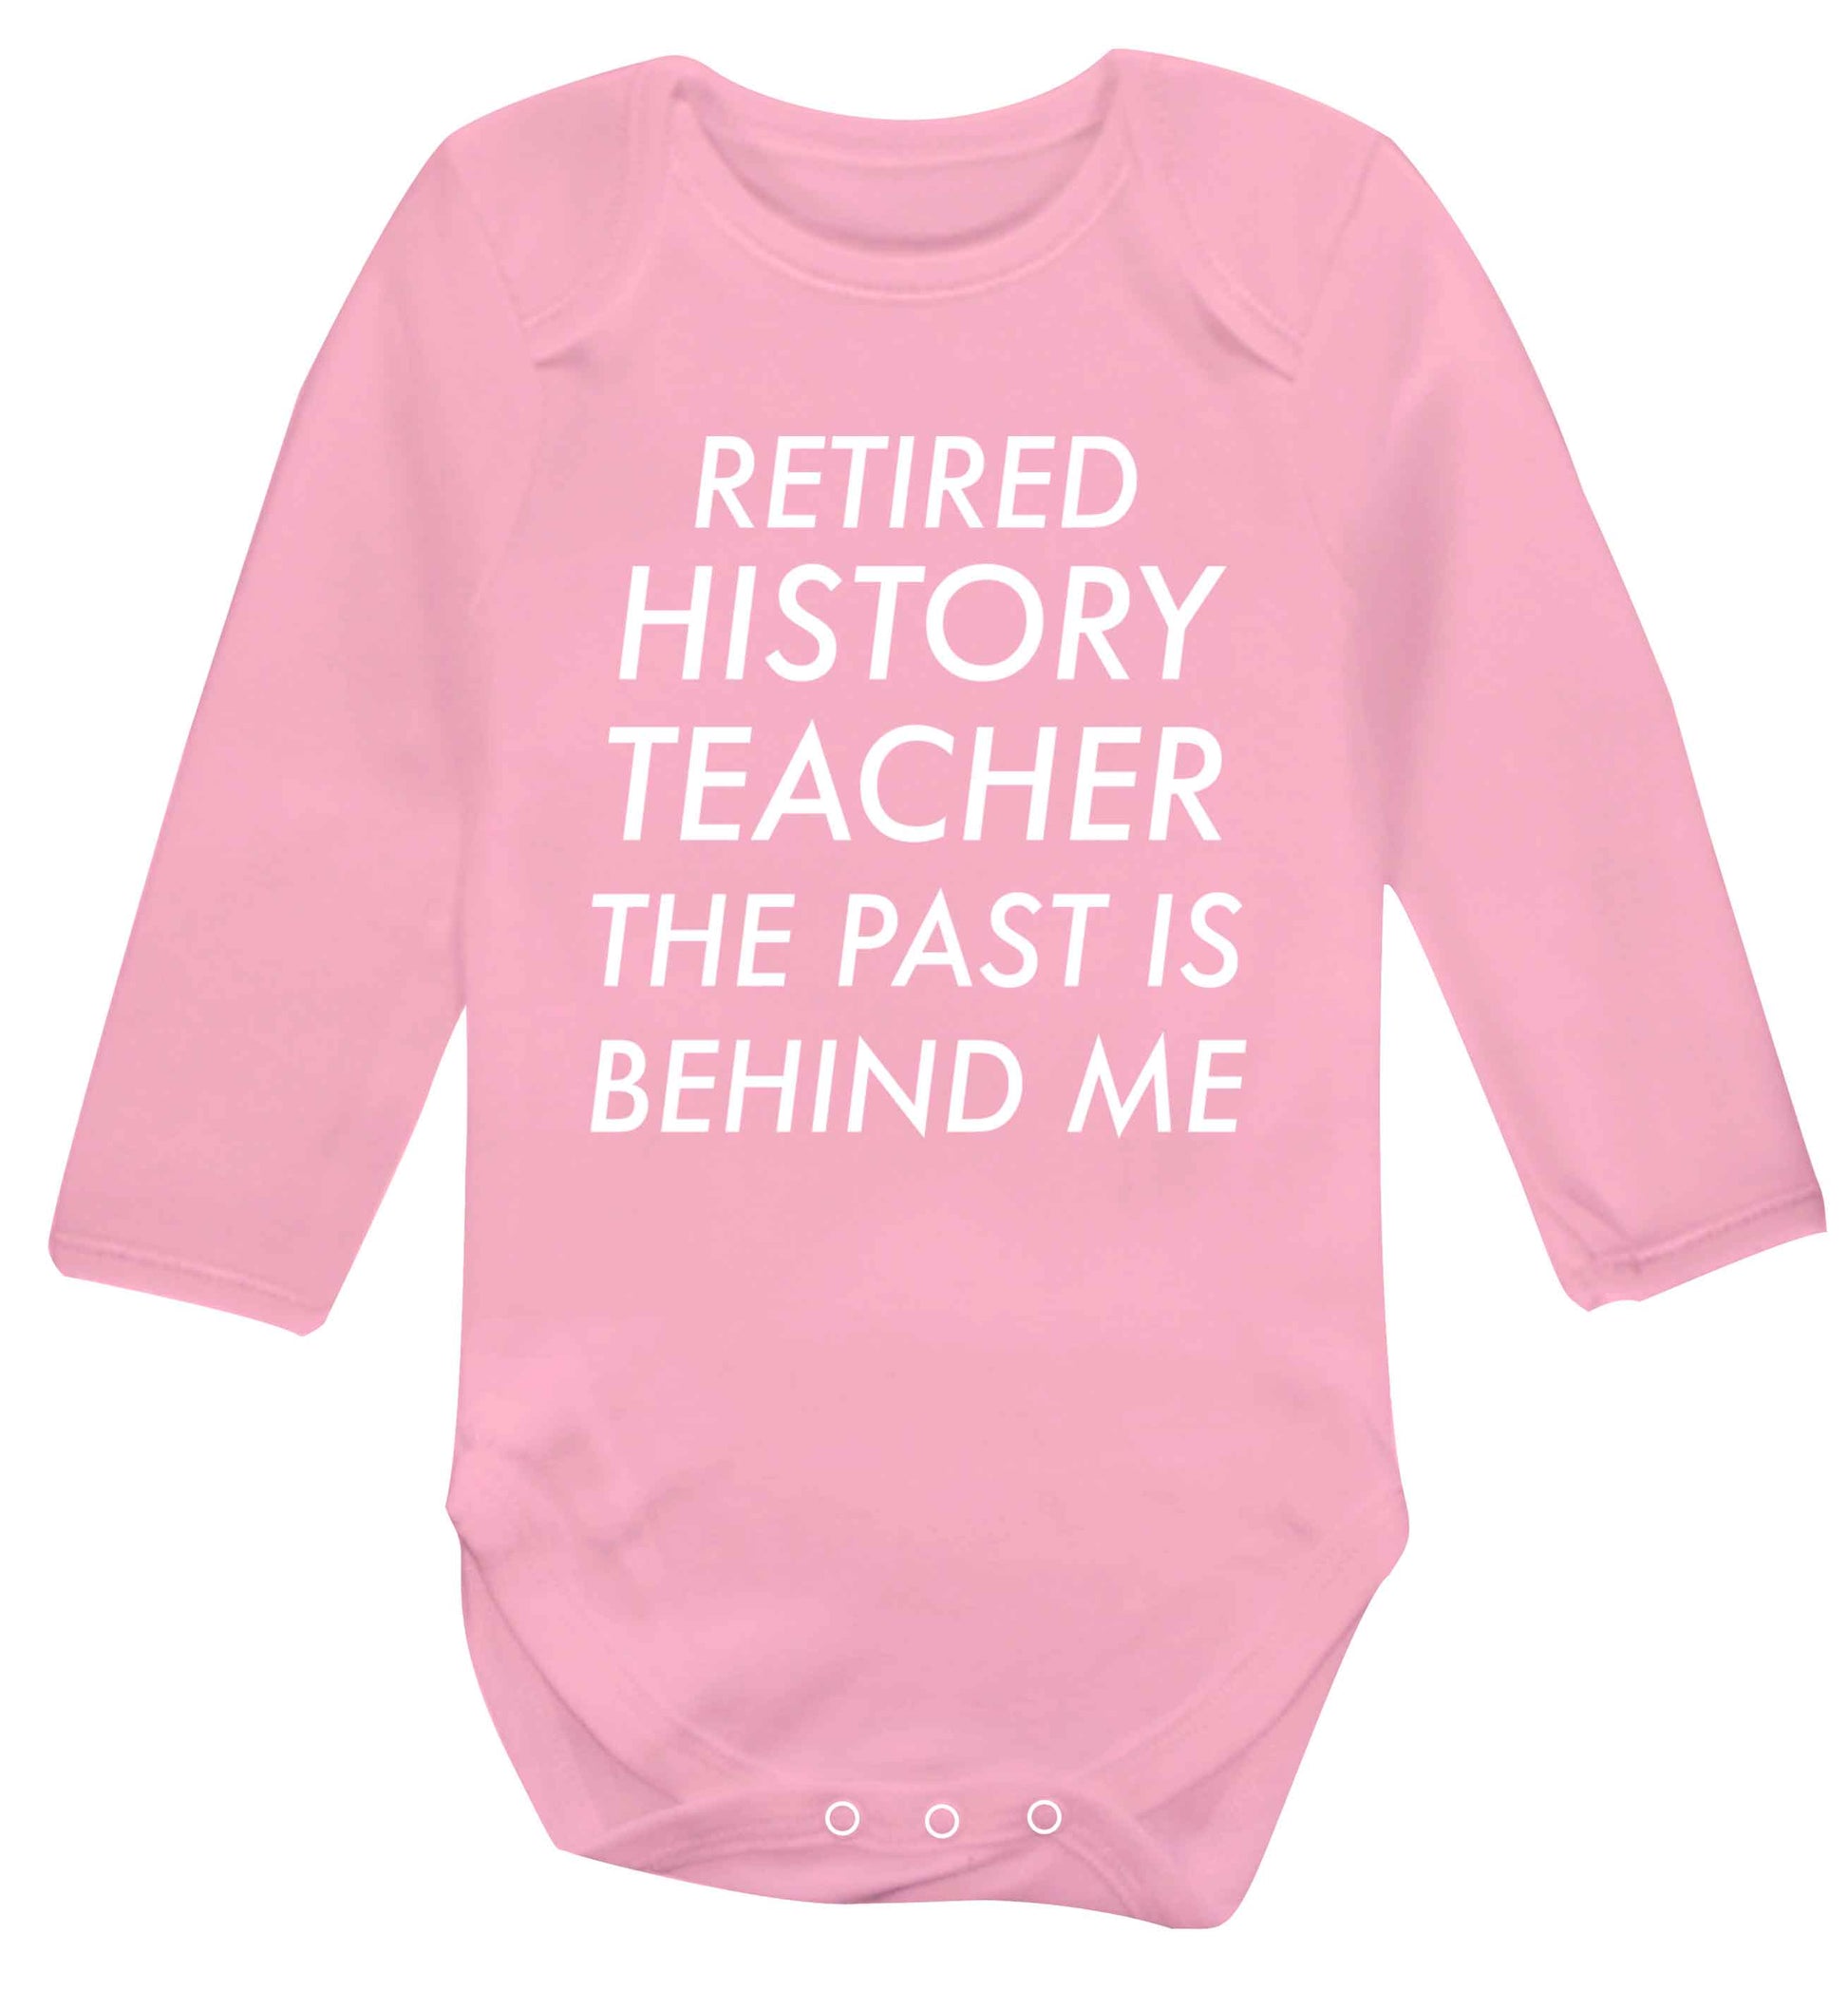 Retired history teacher the past is behind me Baby Vest long sleeved pale pink 6-12 months